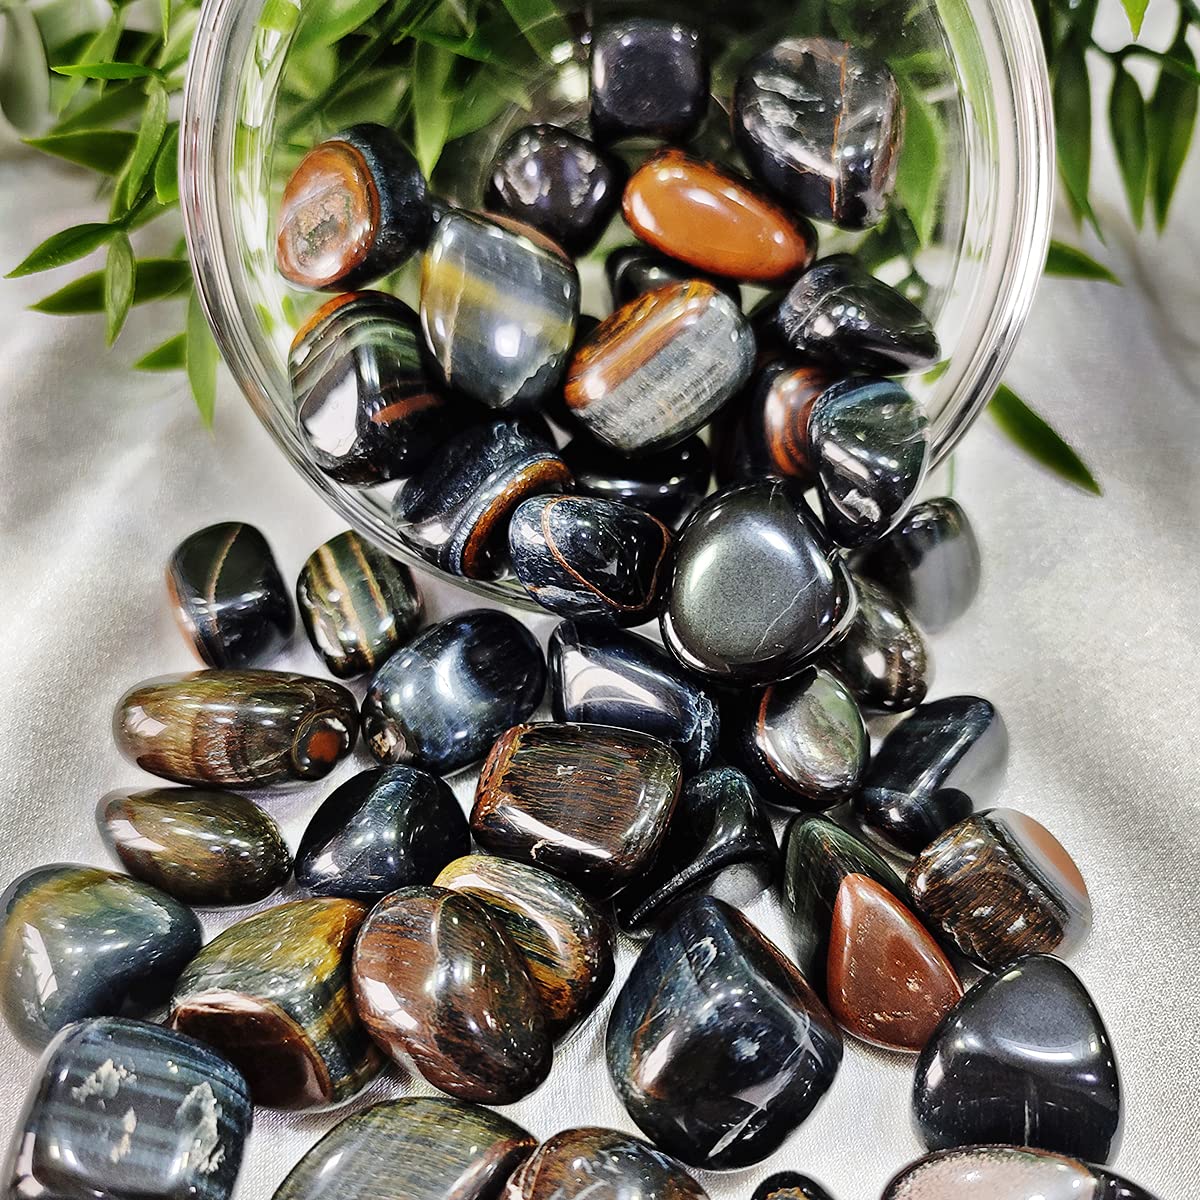 Bluequeen Blue Tiger Eye Tumble Stones for Reiki Healing Crystal Blue Tiger Eye Tumbled Stones 200 Grams